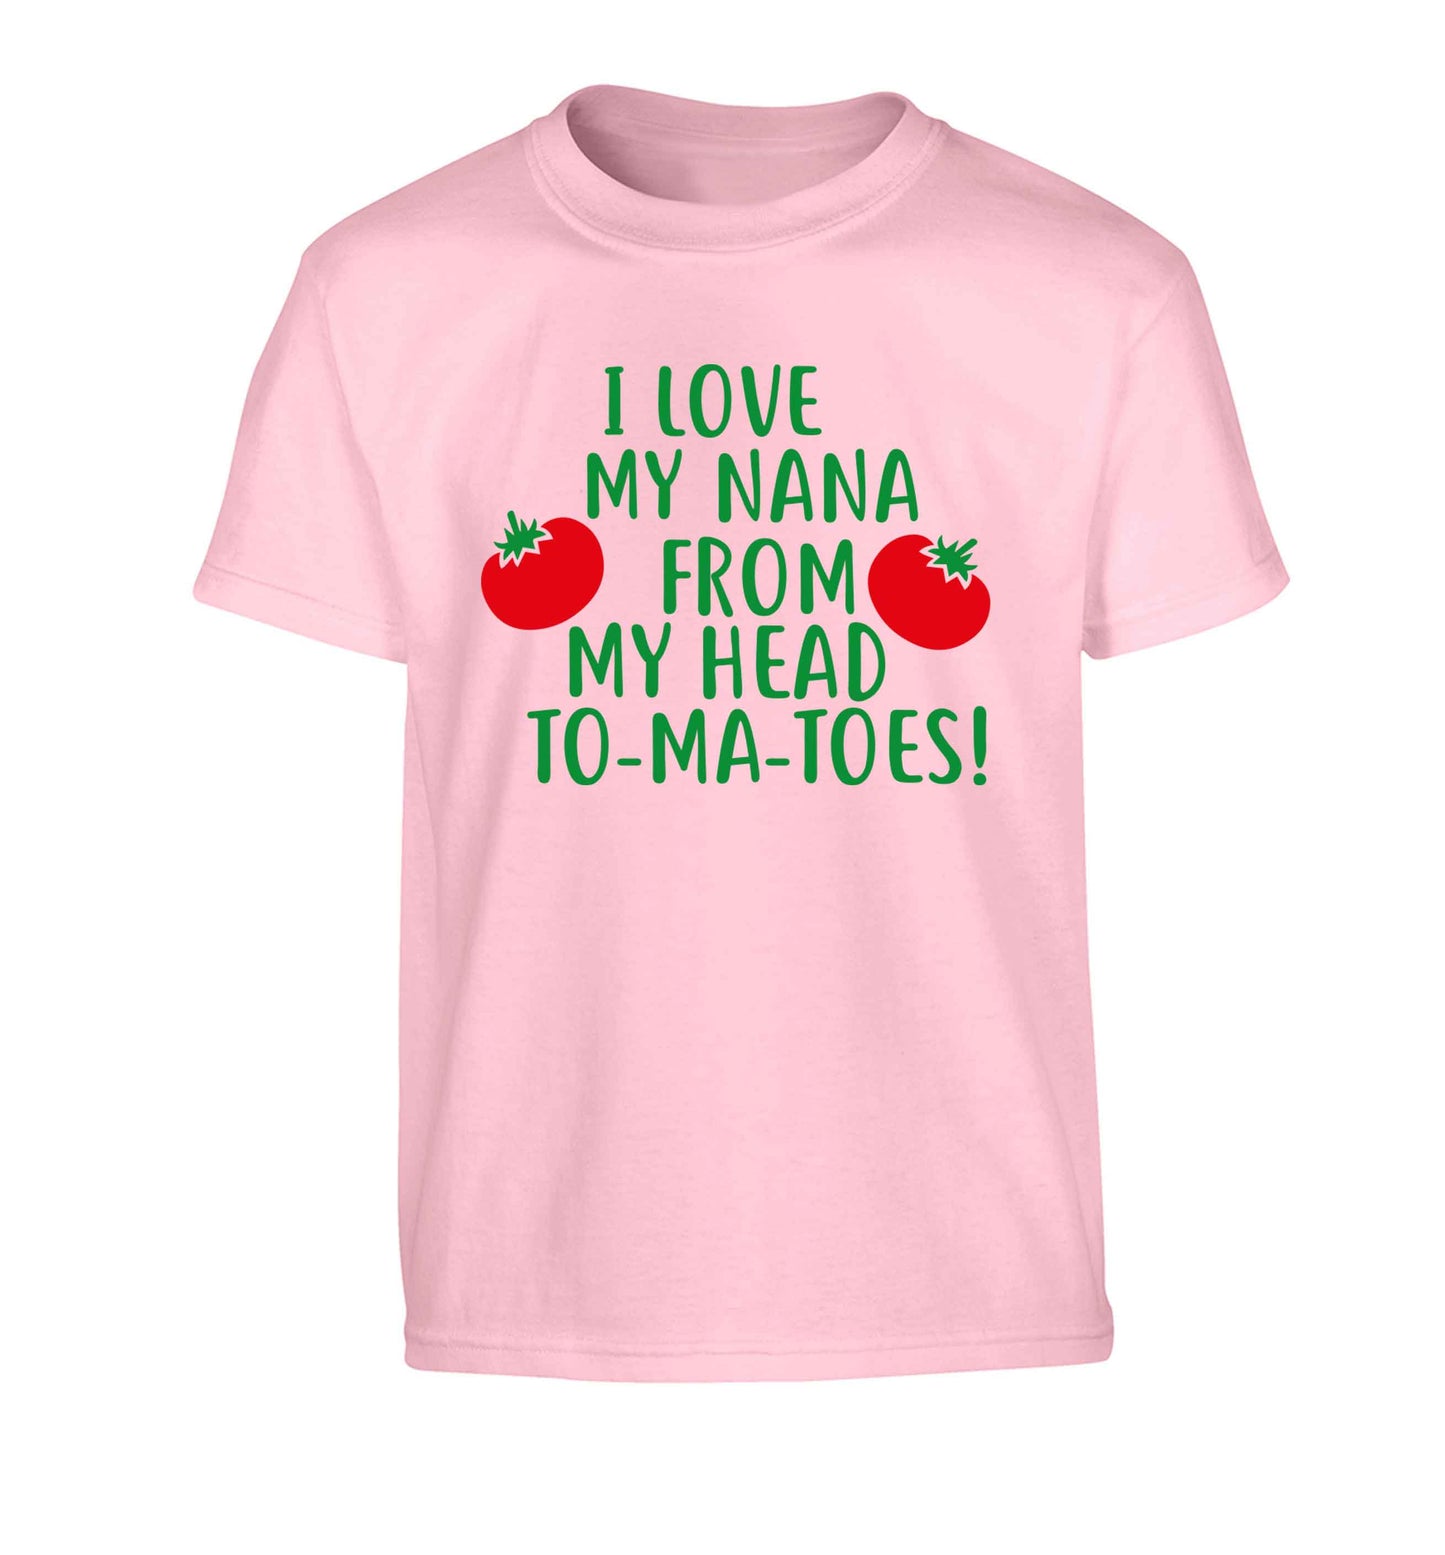 I love my nana from my head to-ma-toes Children's light pink Tshirt 12-13 Years